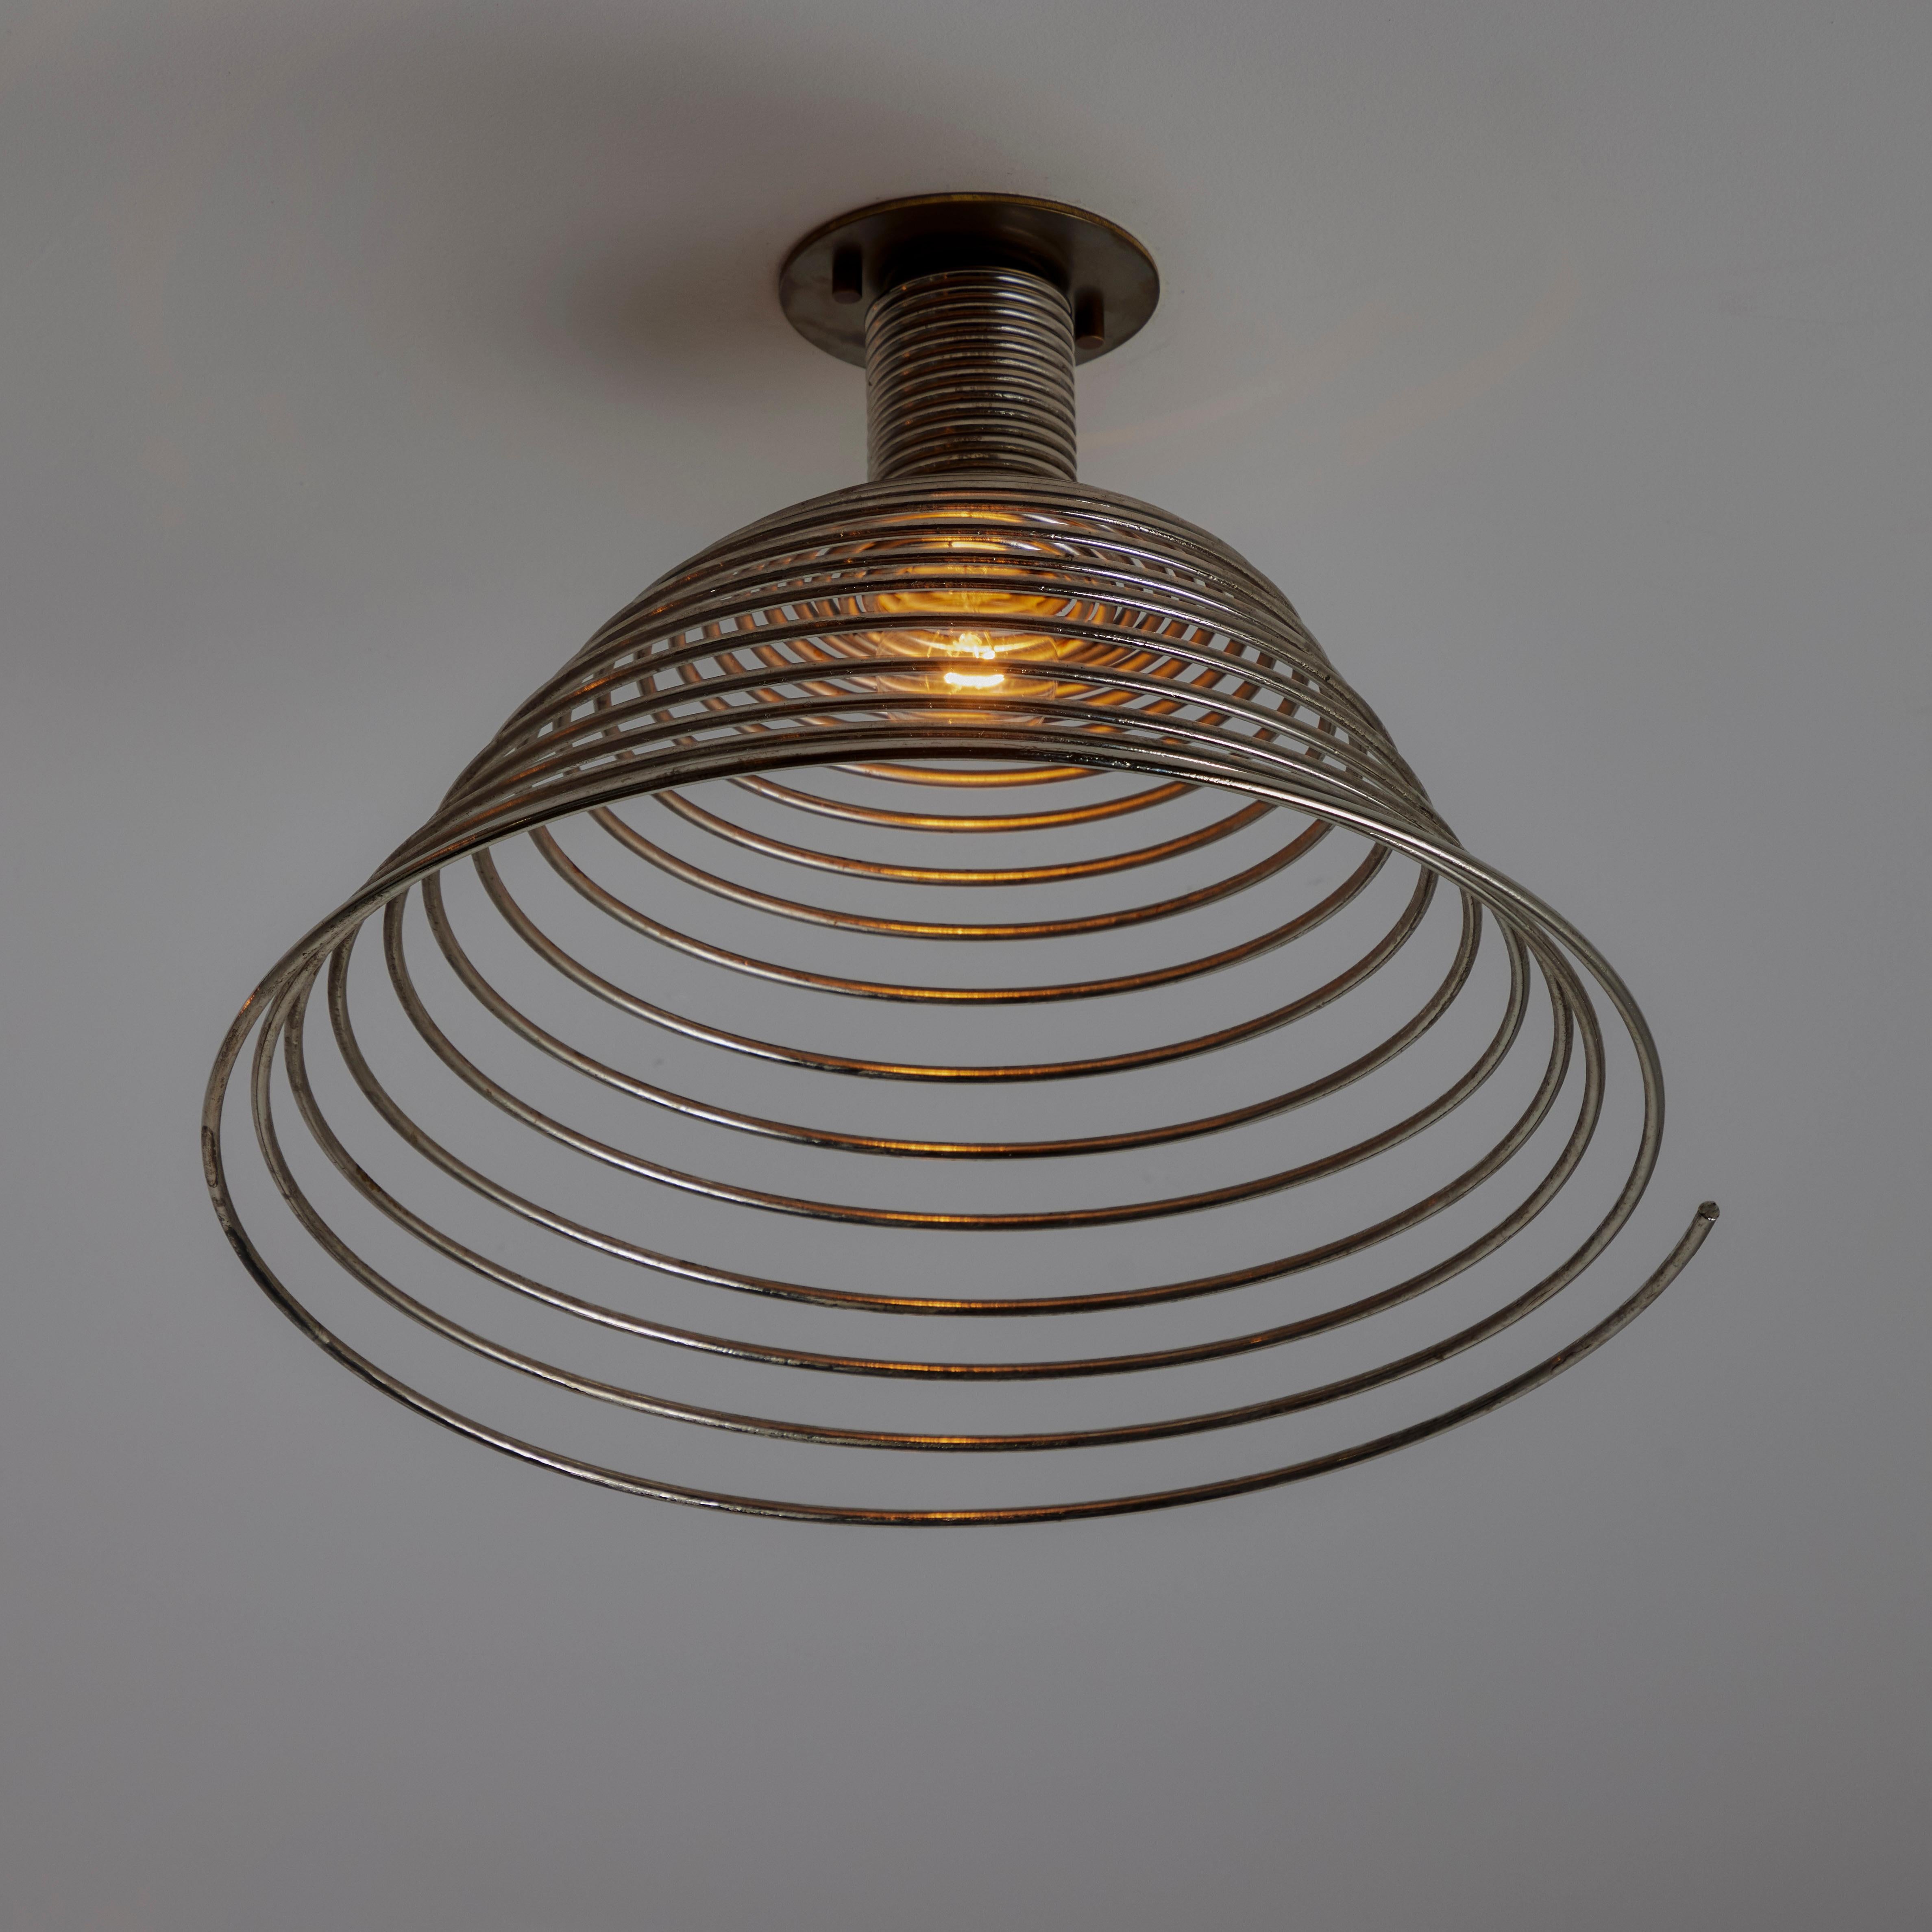 Single 'Spirali' Ceiling or Wall Light by Angelo Mangiarotti for Candle